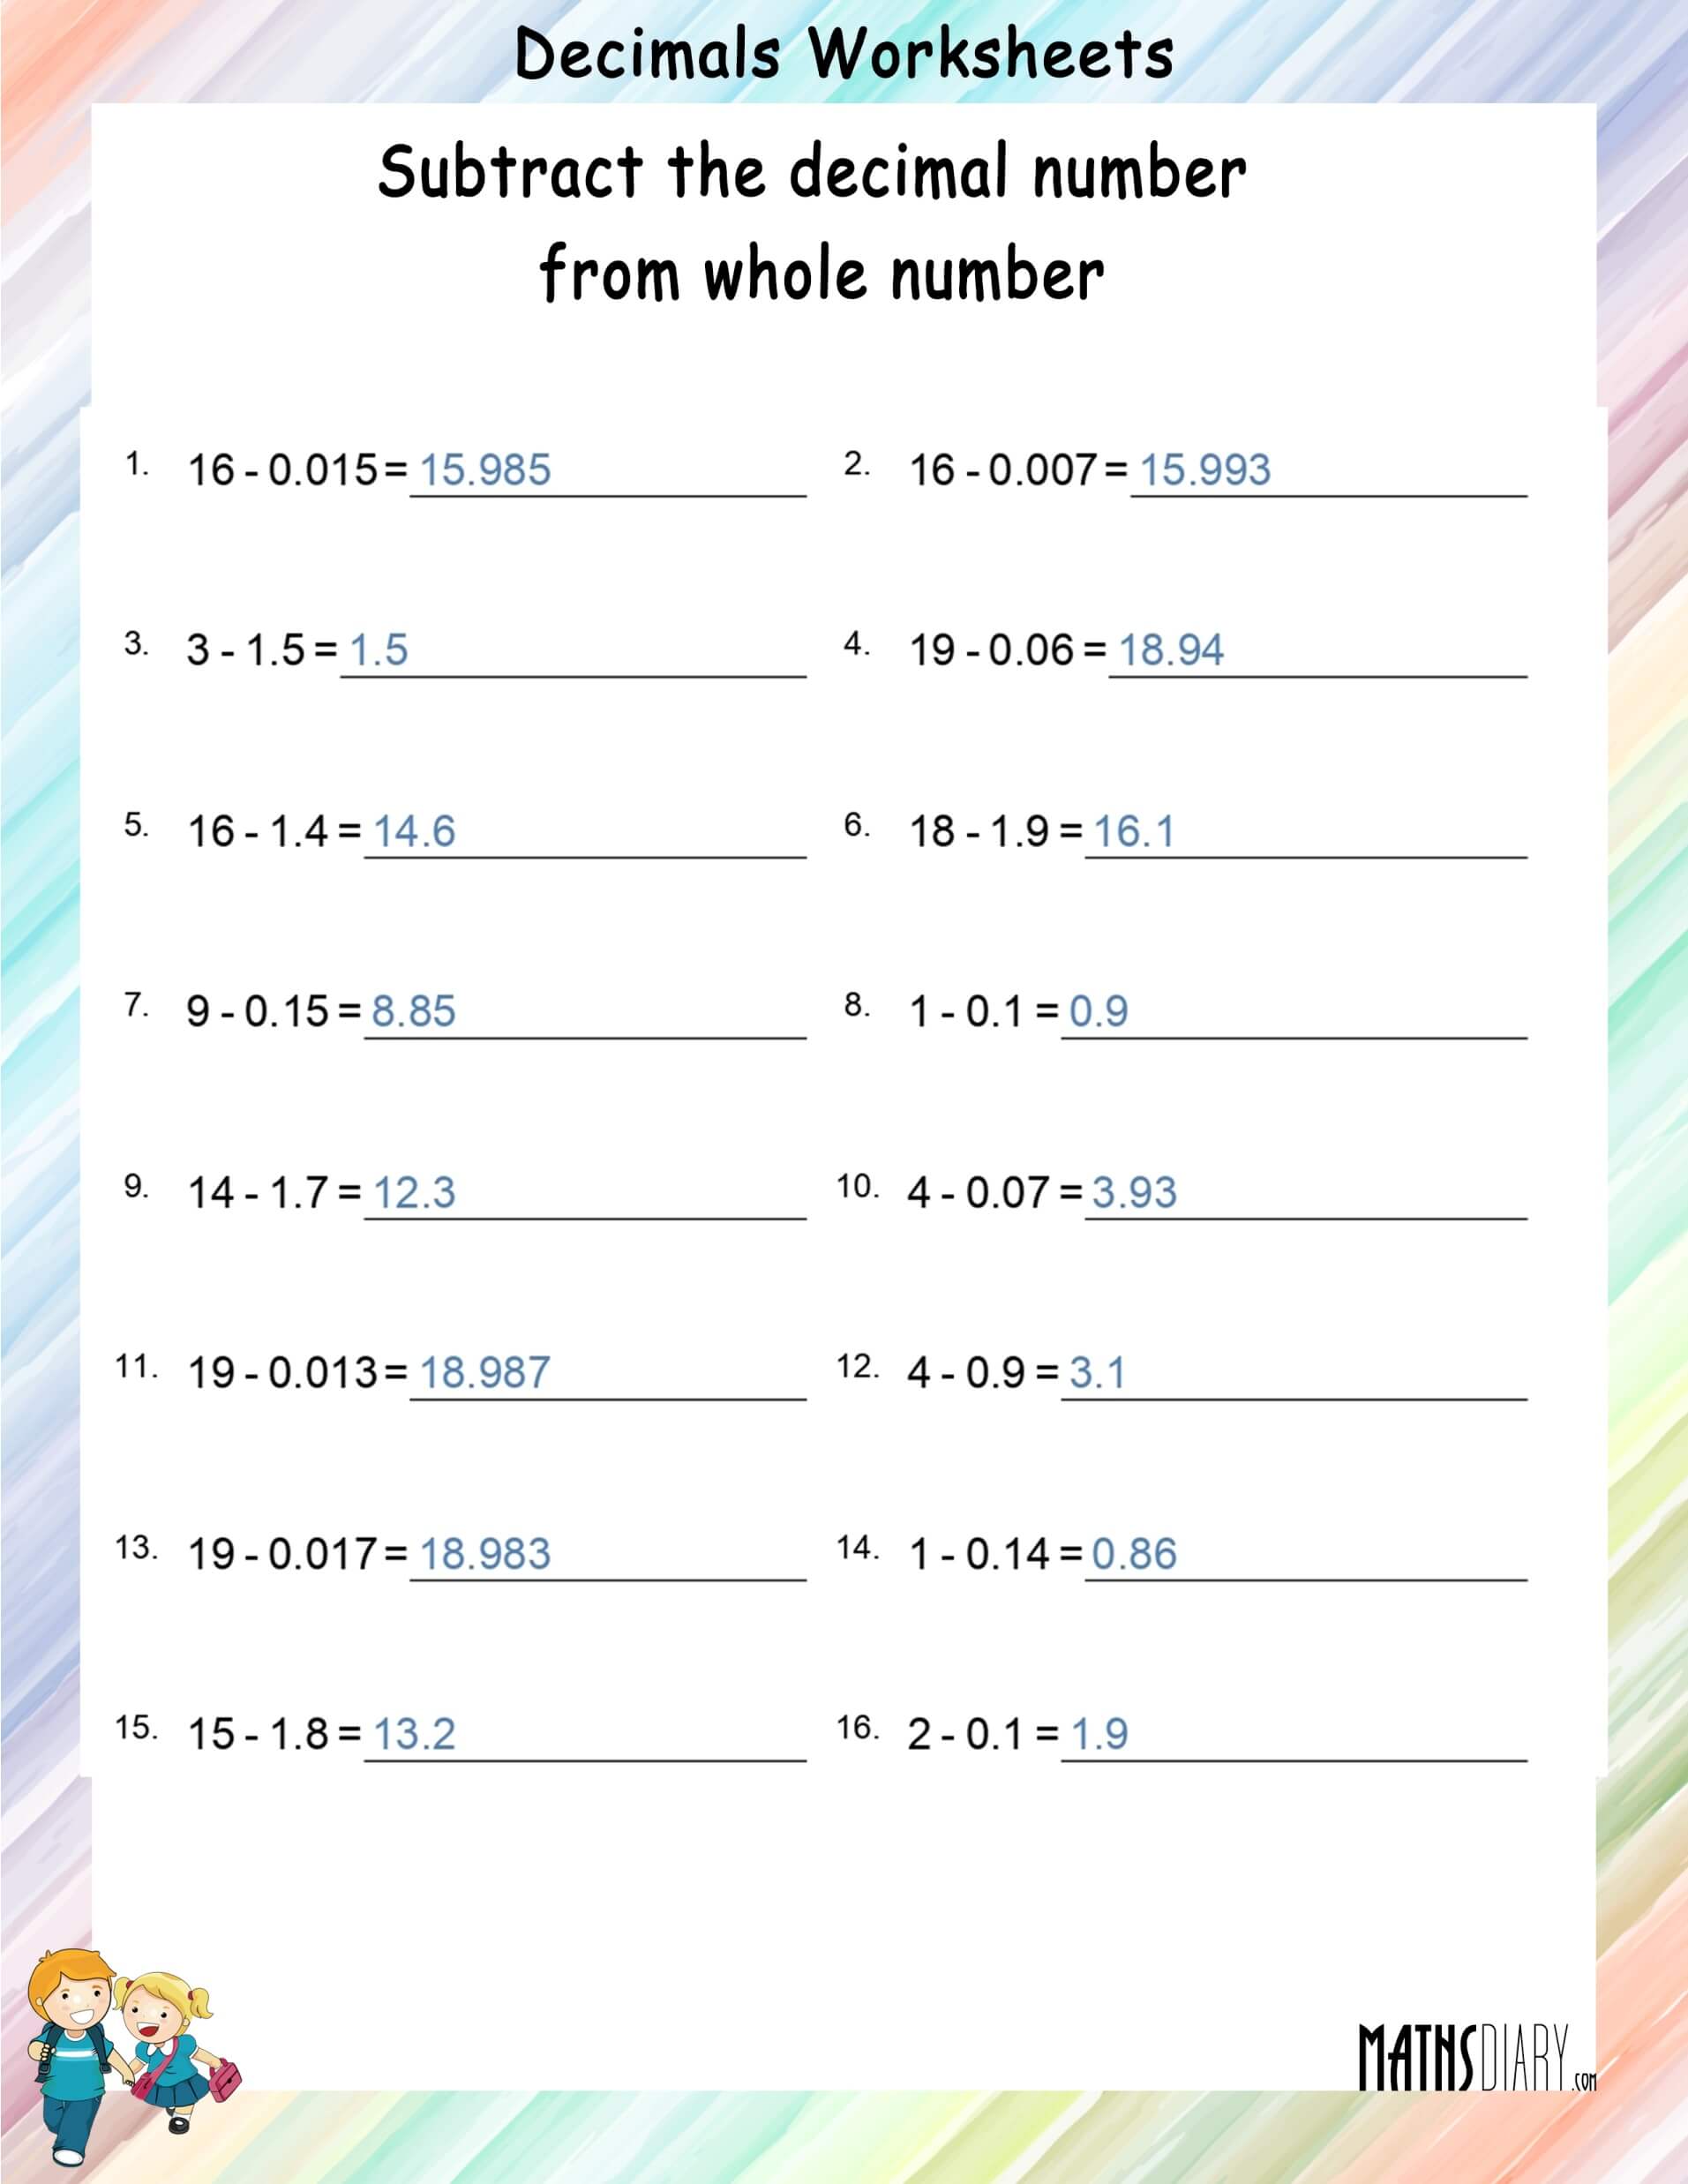 subtract the decimal number from the whole number math worksheets mathsdiary com